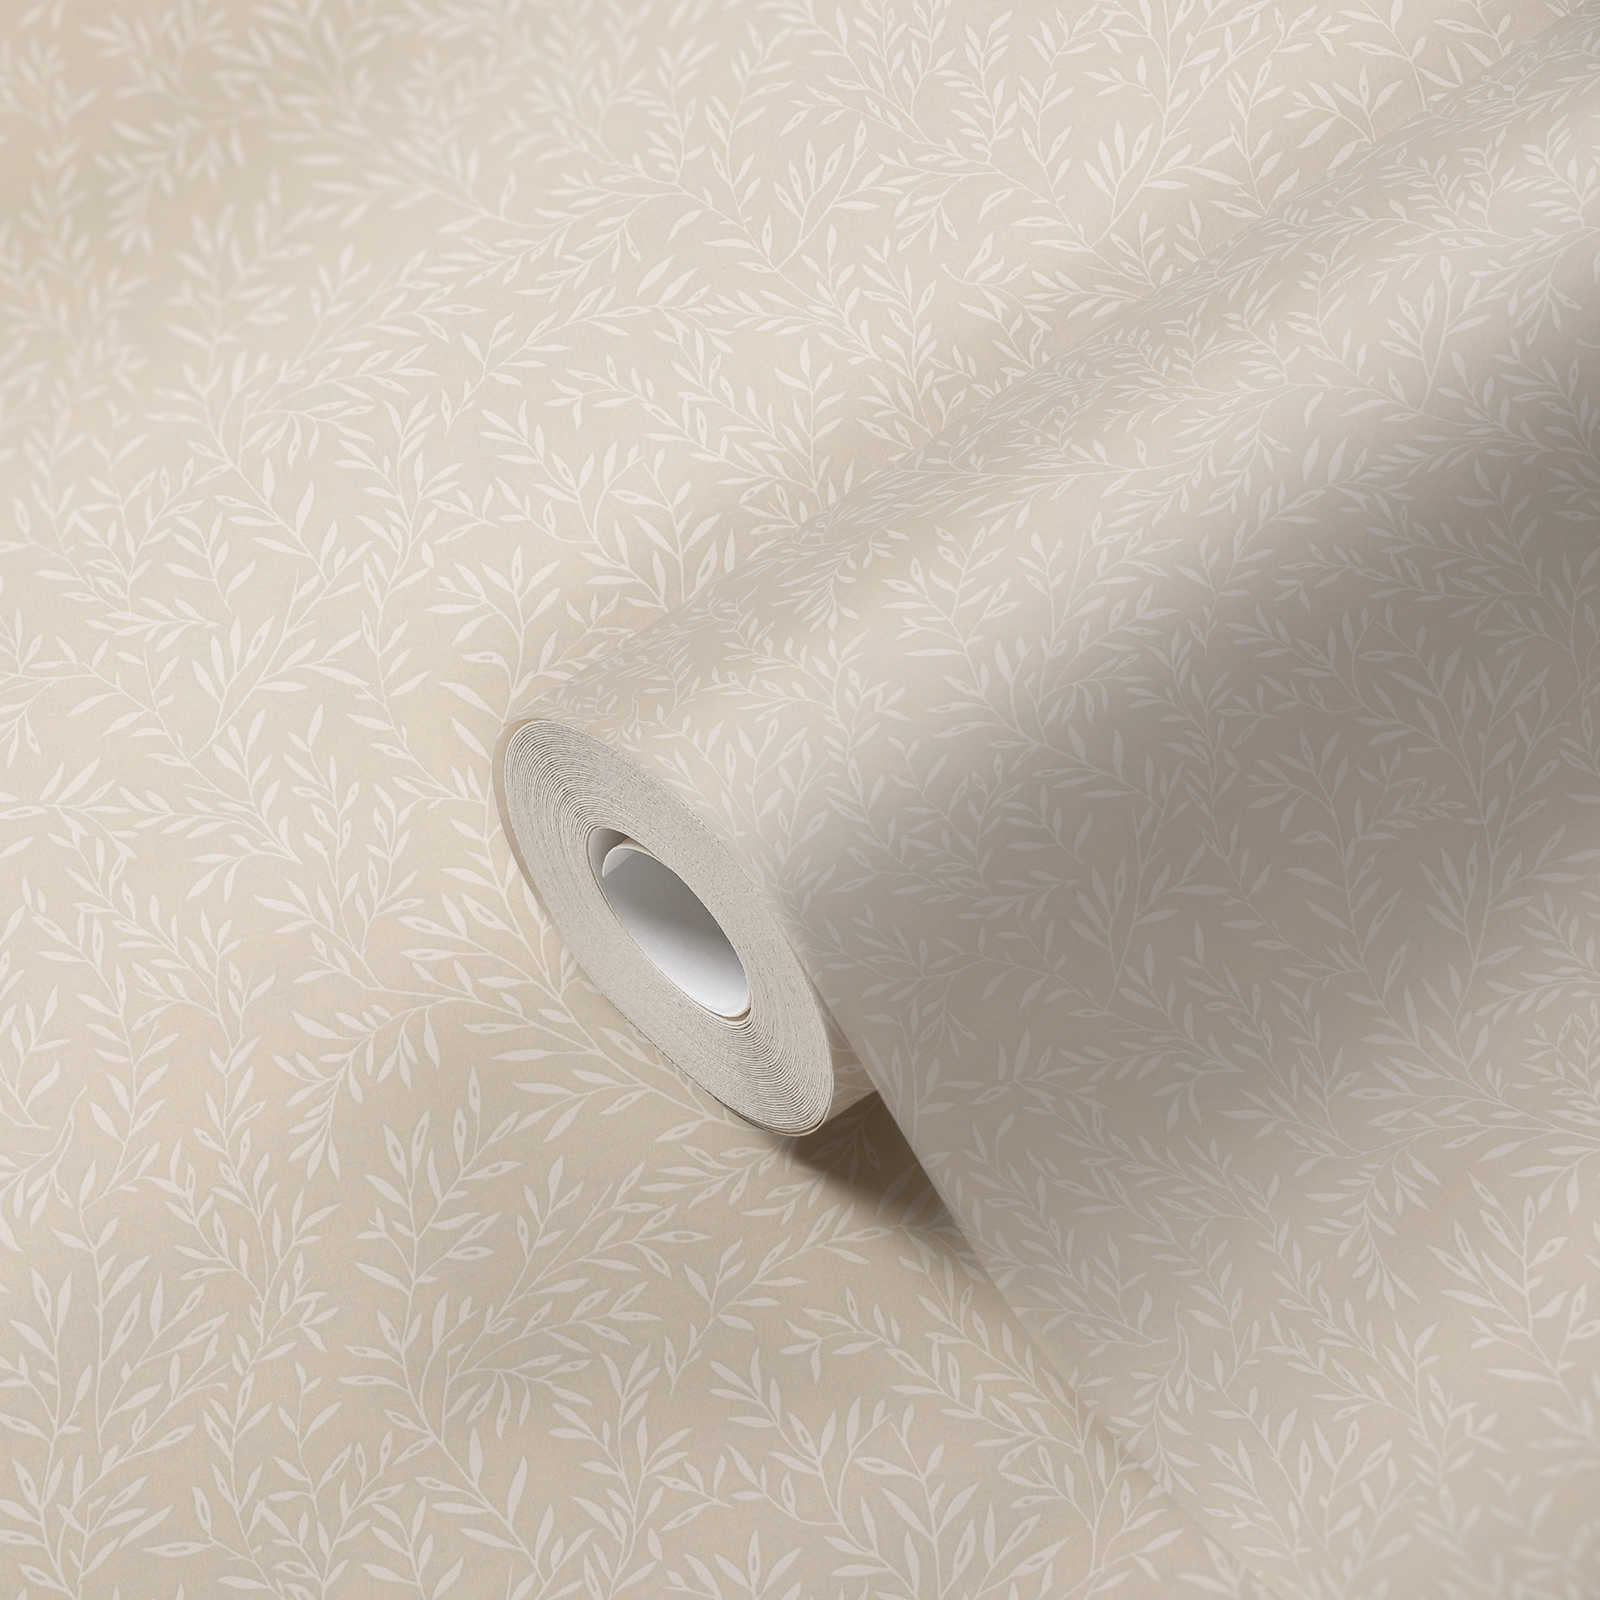             Country house wallpaper with tendril pattern - beige, white
        